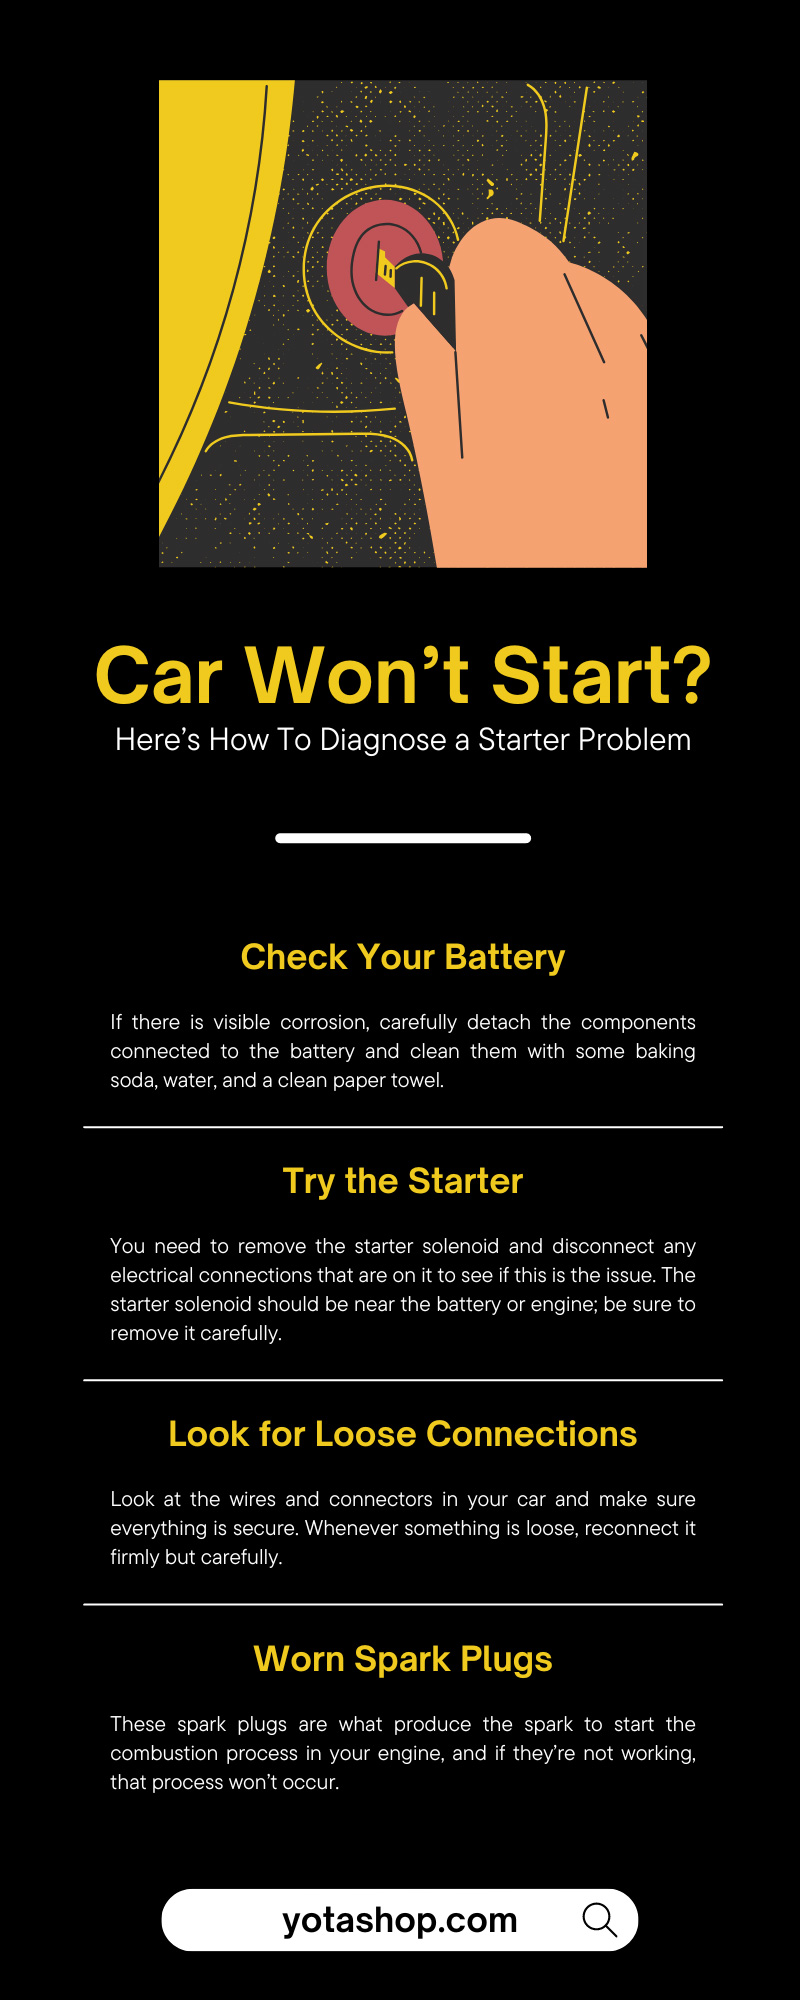 Car Won’t Start? Here’s How To Diagnose a Starter Problem